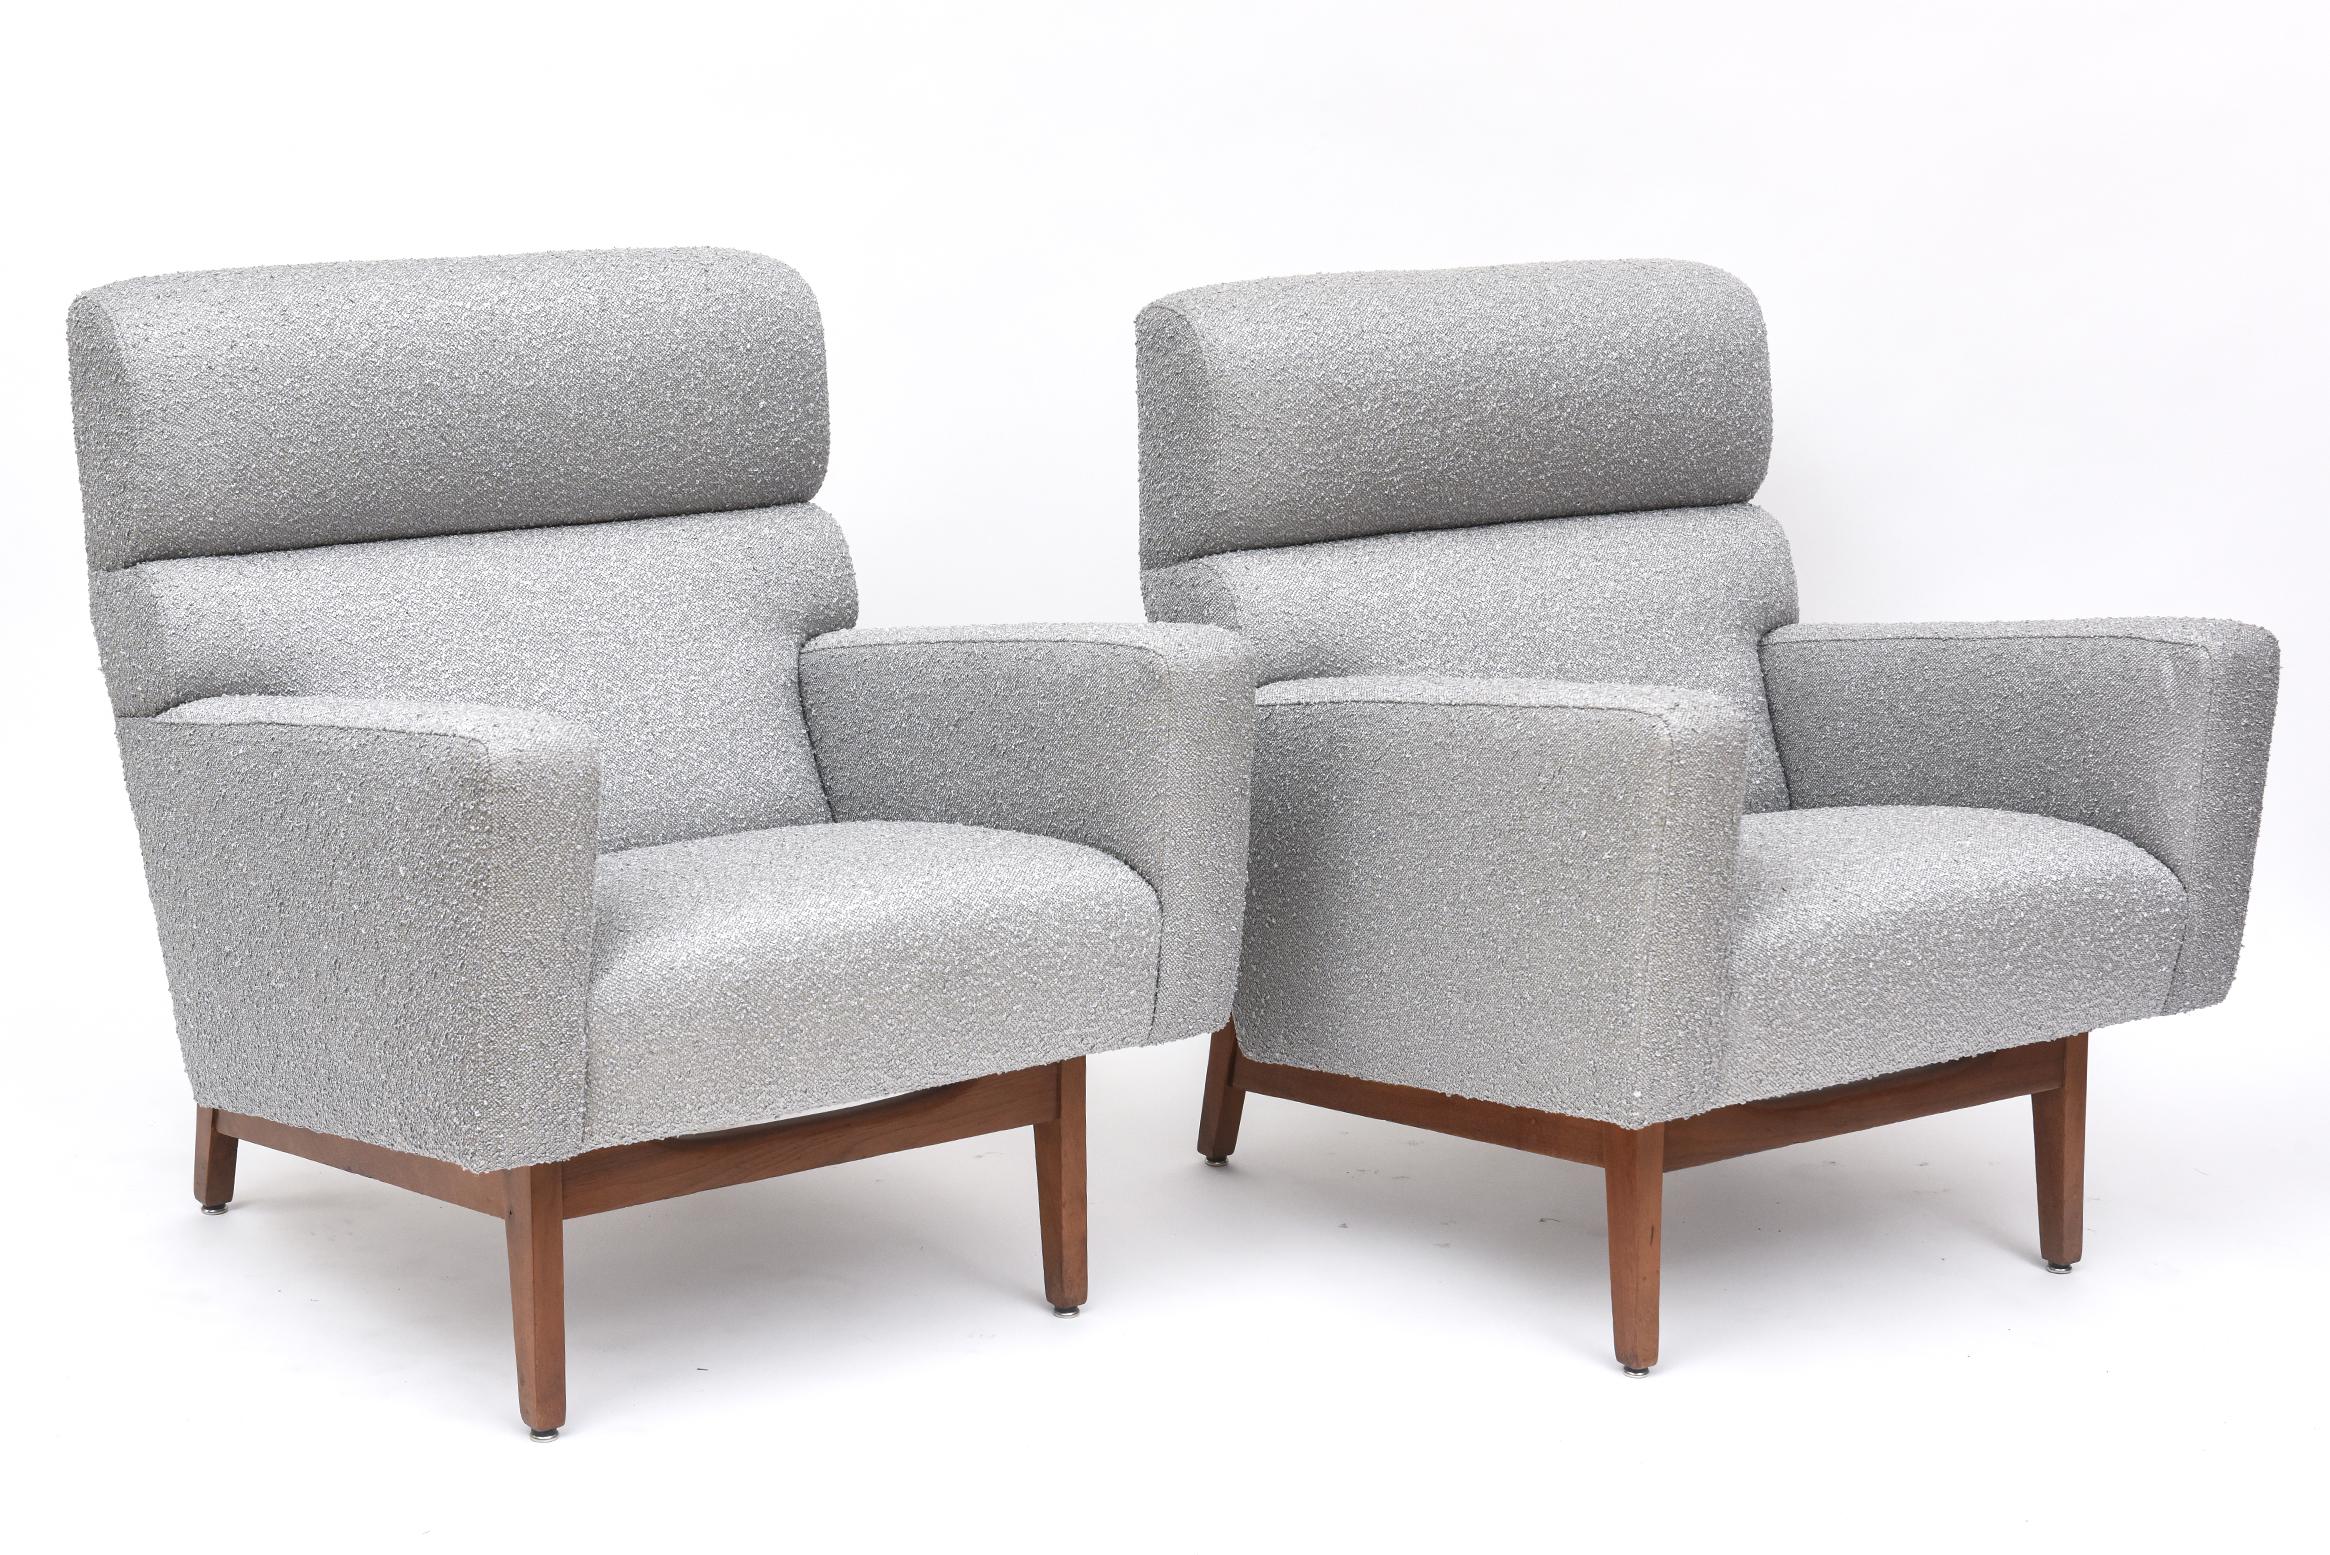 Stylish and comfortable, these meticulously restored pair of American mid-century modern lounge chairs by Jens Risom have new silver boucle upholstery on walnut bases. Originally born and trained in Copenhagen, Risom was responsible for bringing